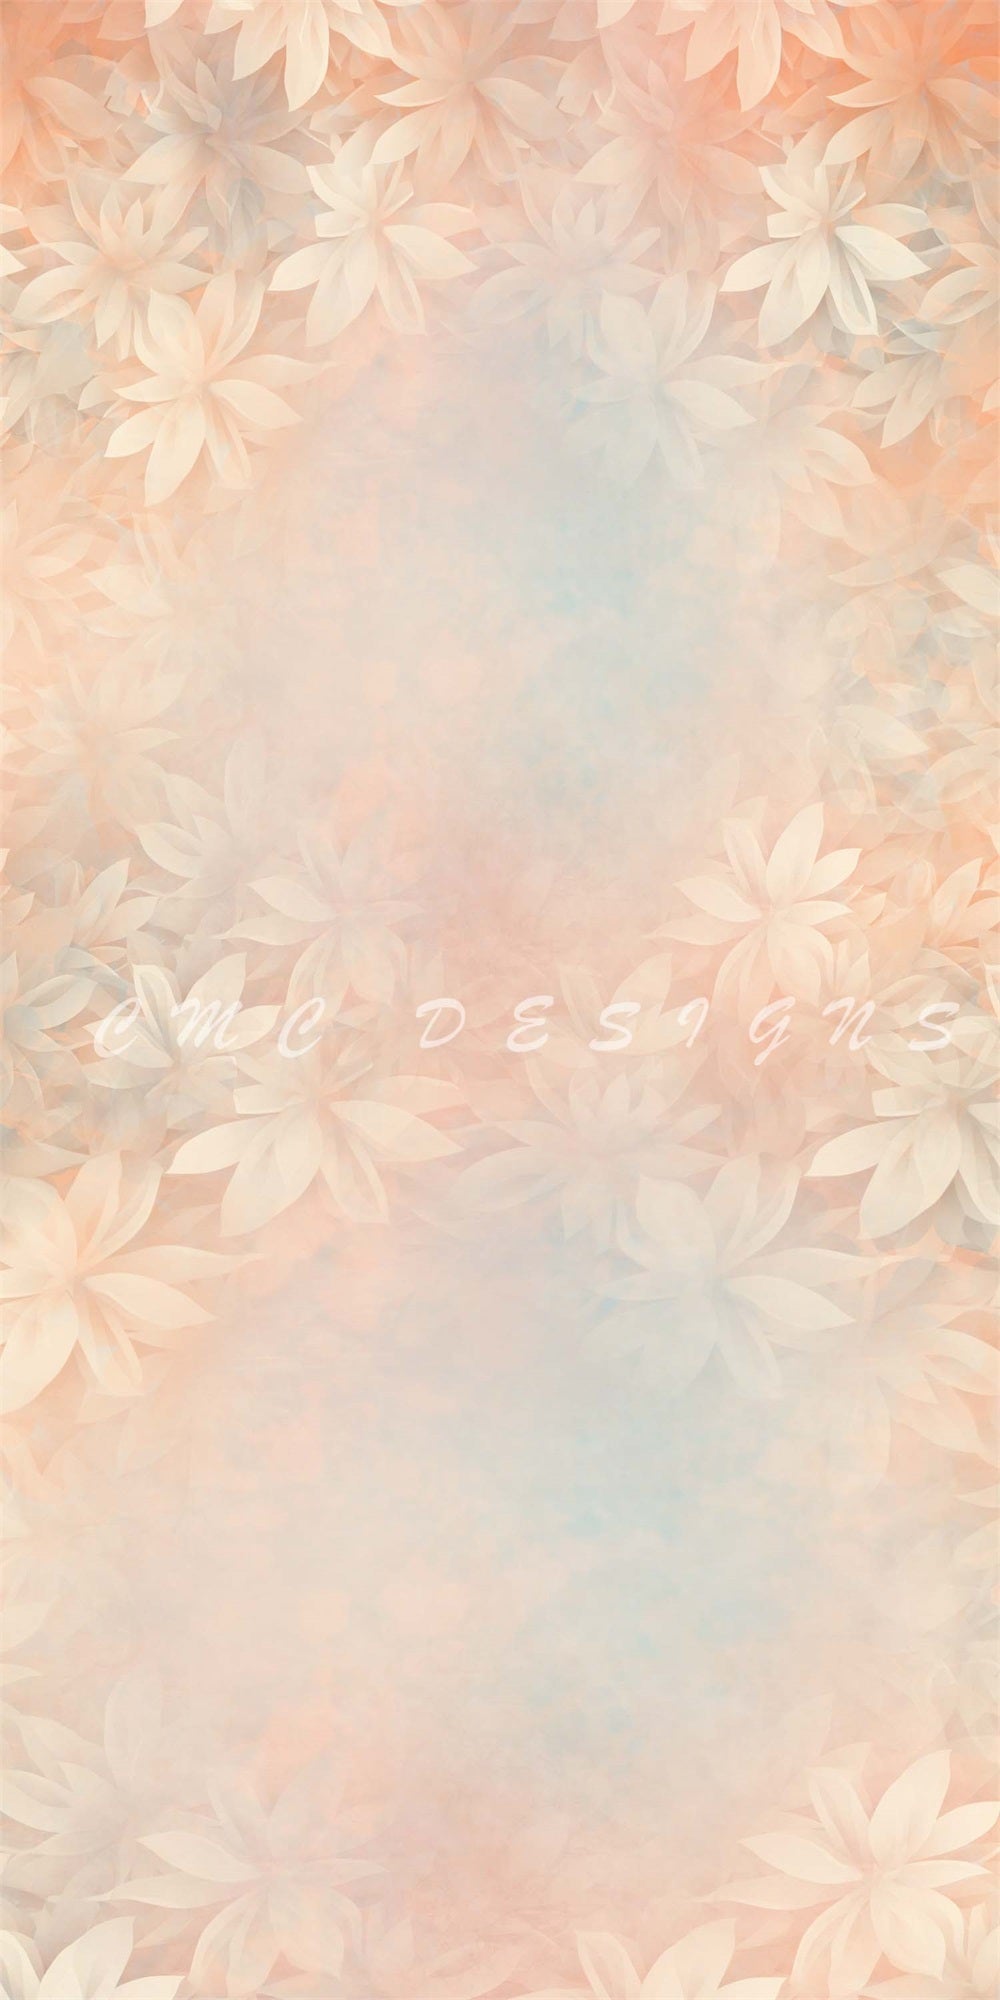 Kate Sweep Abstract Fine Art Pink Flower Blue Texture Backdrop Designed by Candice Compton